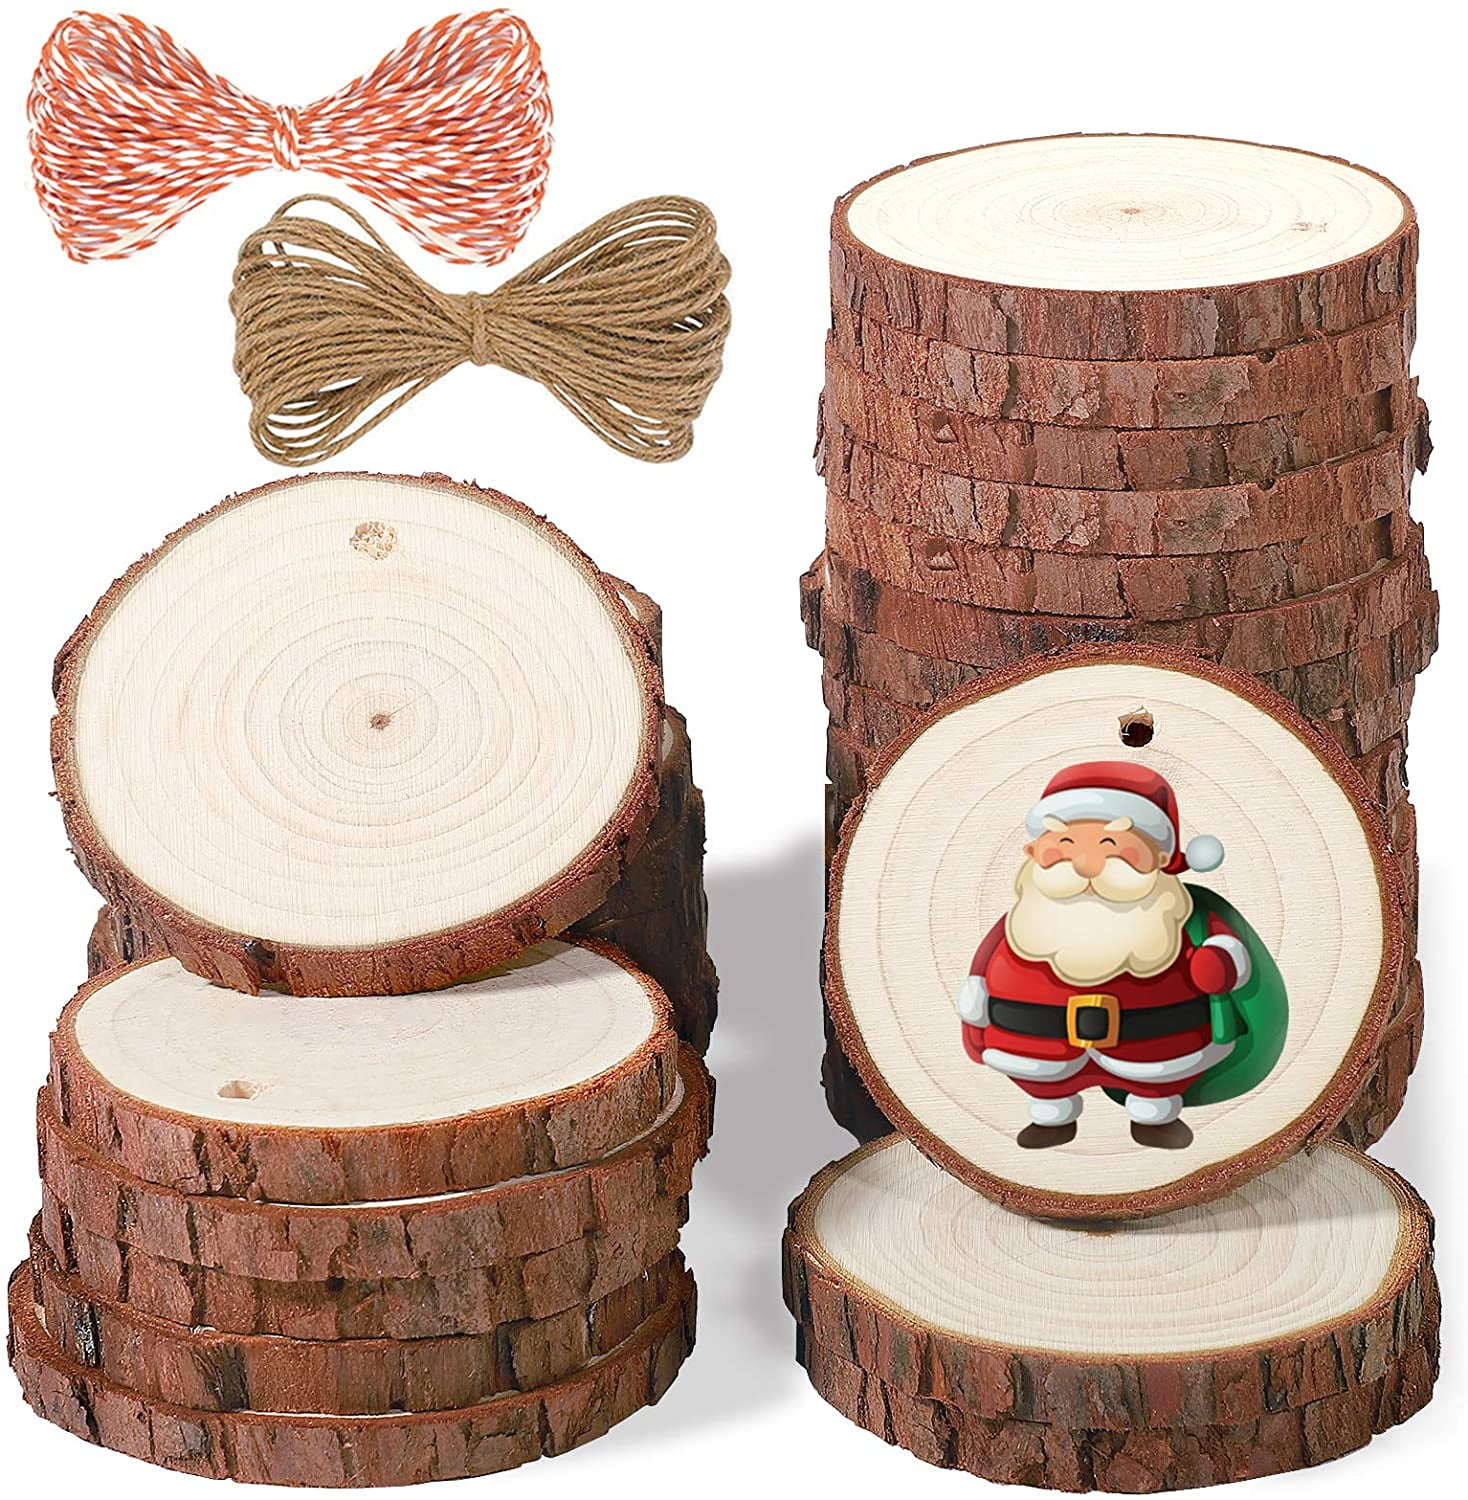 Natural Wood Slices 50 Pcs 2.0-2.4 Craft Unfinished Wood with Pre-drilled Hole and 49 Feet Twine String for Arts Wood Slices Christmas Ornaments DIY Crafts